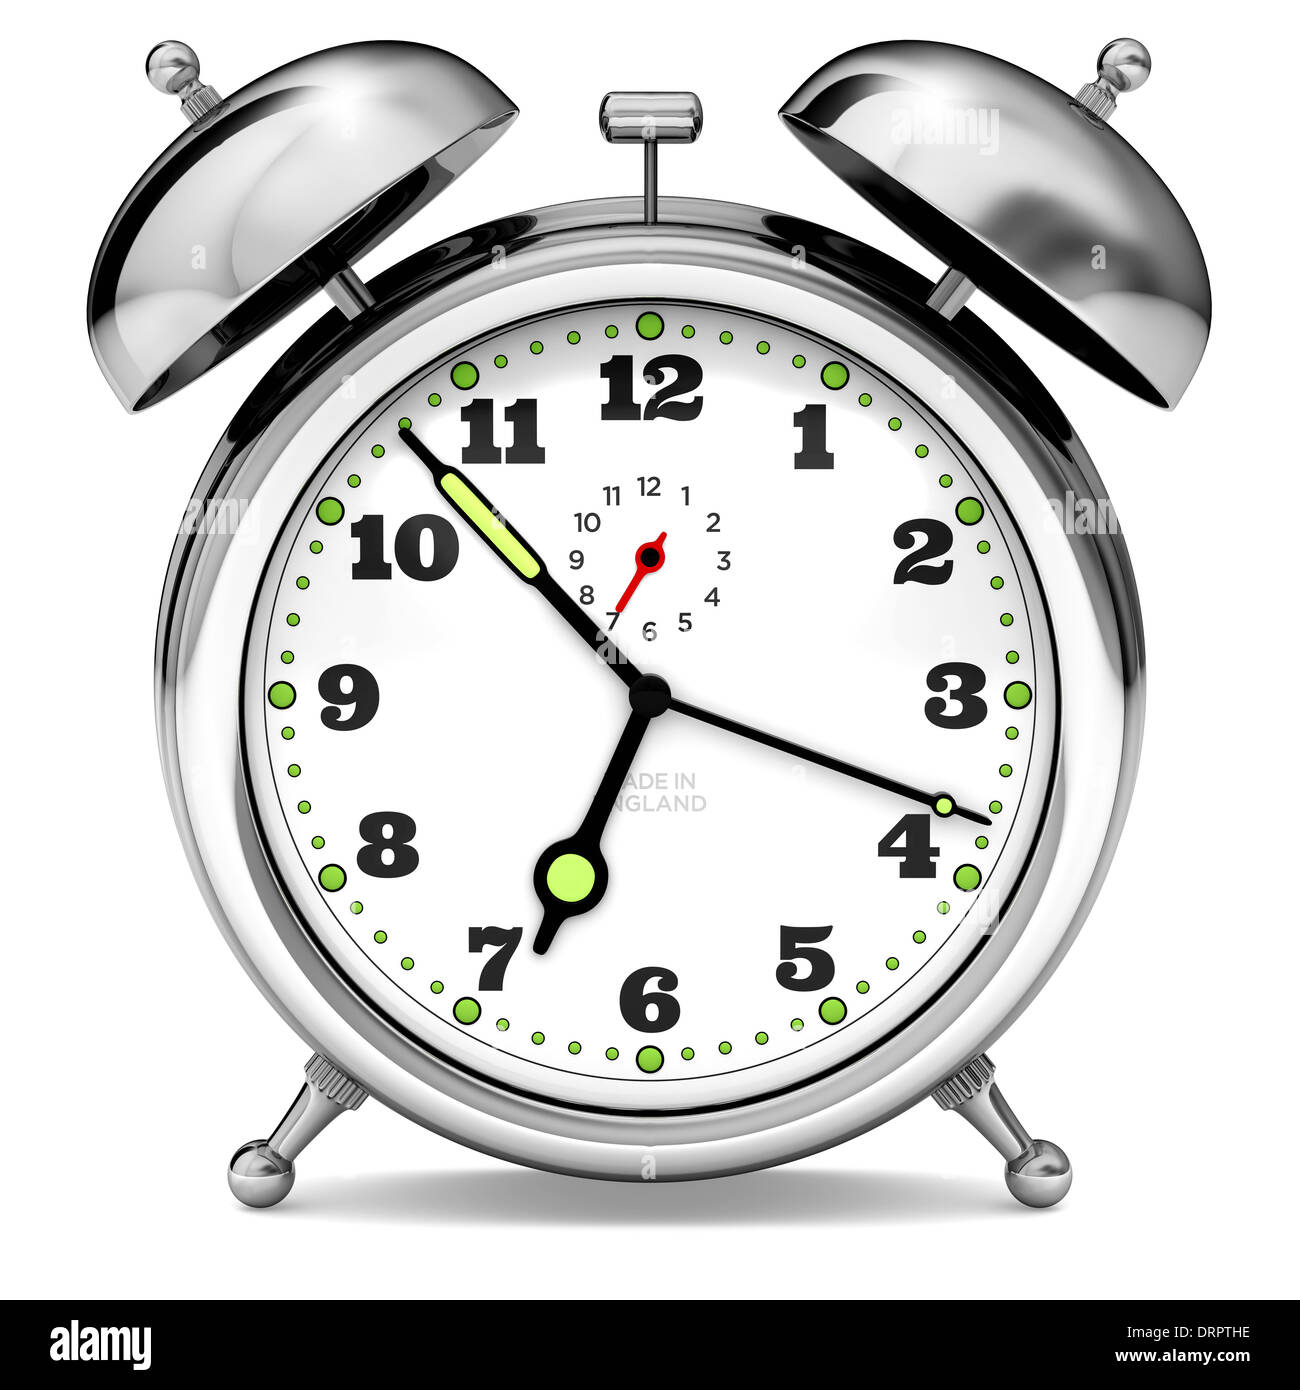 Alarm Clock about to go off. Chrome metal. Old fashioned. Close up on white background. Cut out. Almost time to get up. Unable to sleep. Stock Photo